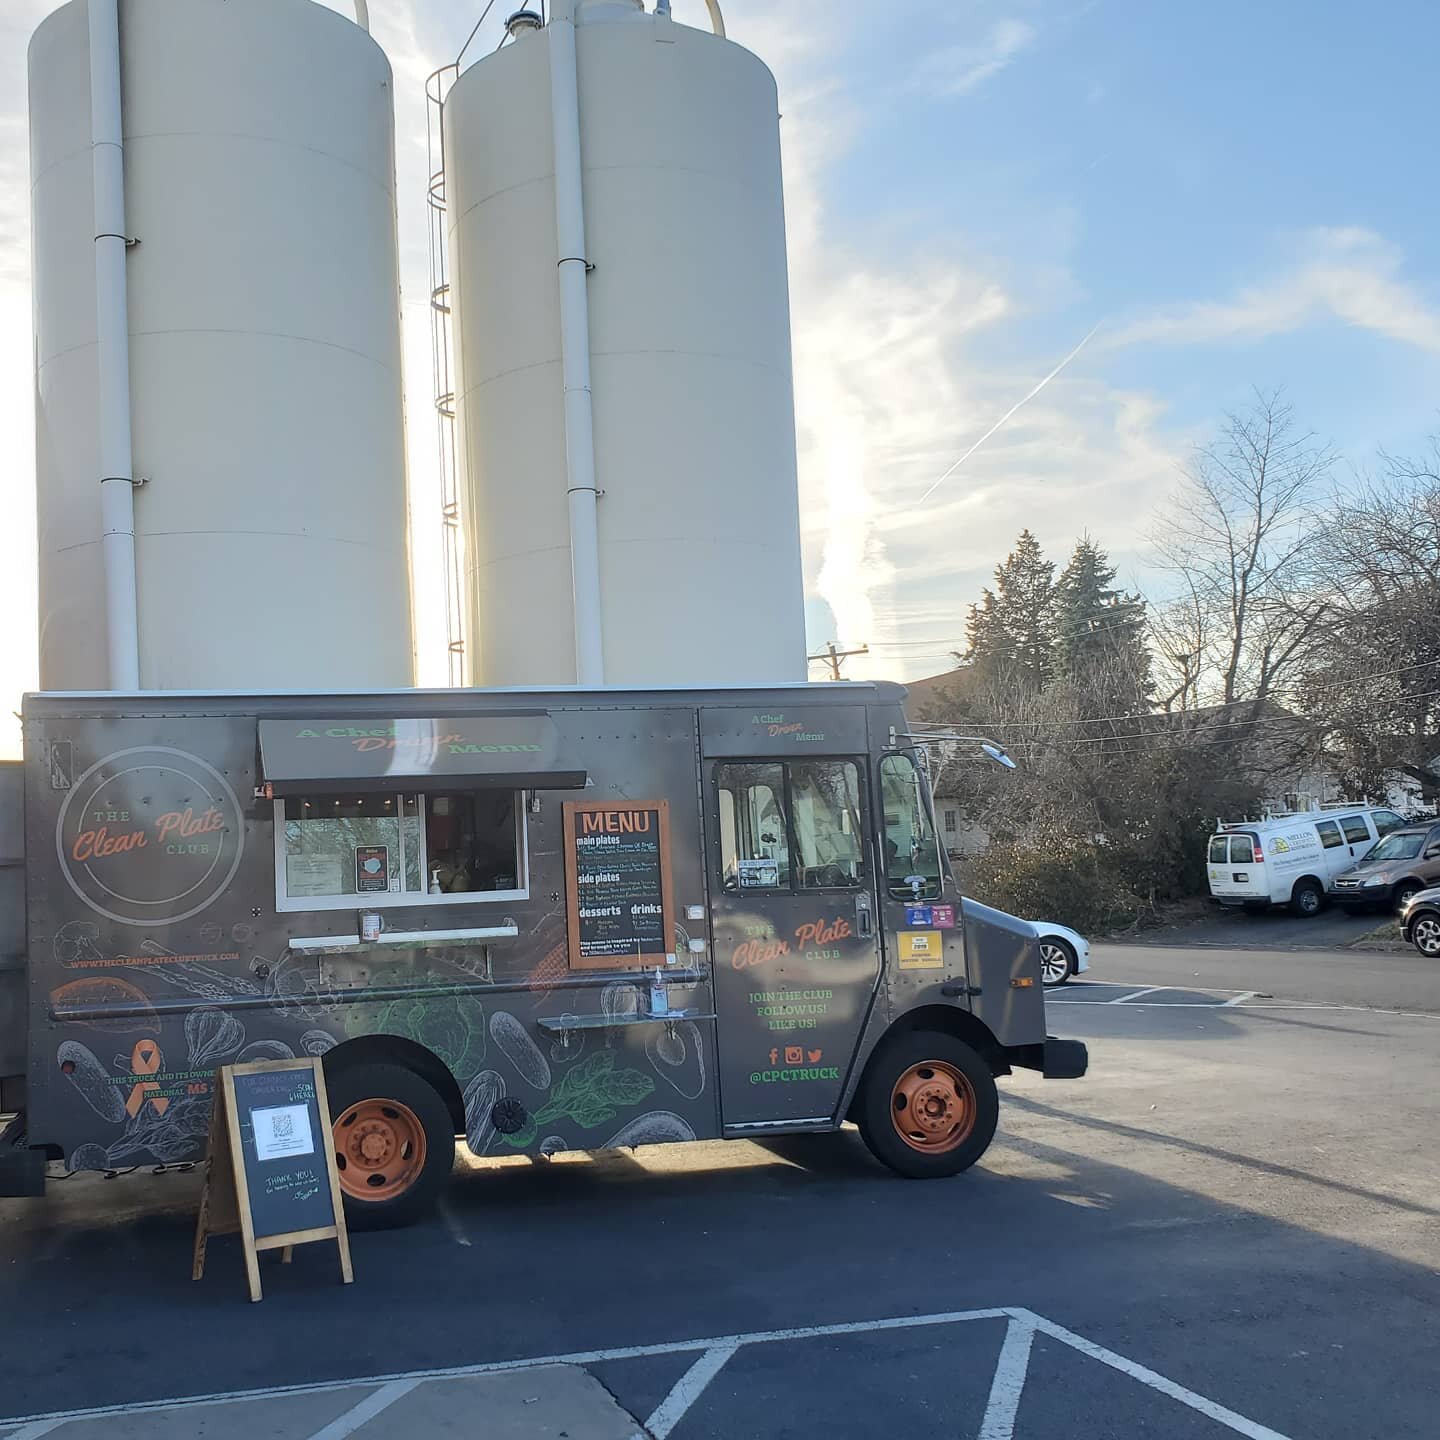 Shaping up to be a damn near perfect evening @neshaminycreekbrewingco . 
Beer release, movie  night, &amp; good food.  That's  what dreams are made of. 

Come stop by!

#buckscountyfoodtrucks #buckscounty #philly #philadelphia #phillyfoodtrucks #food